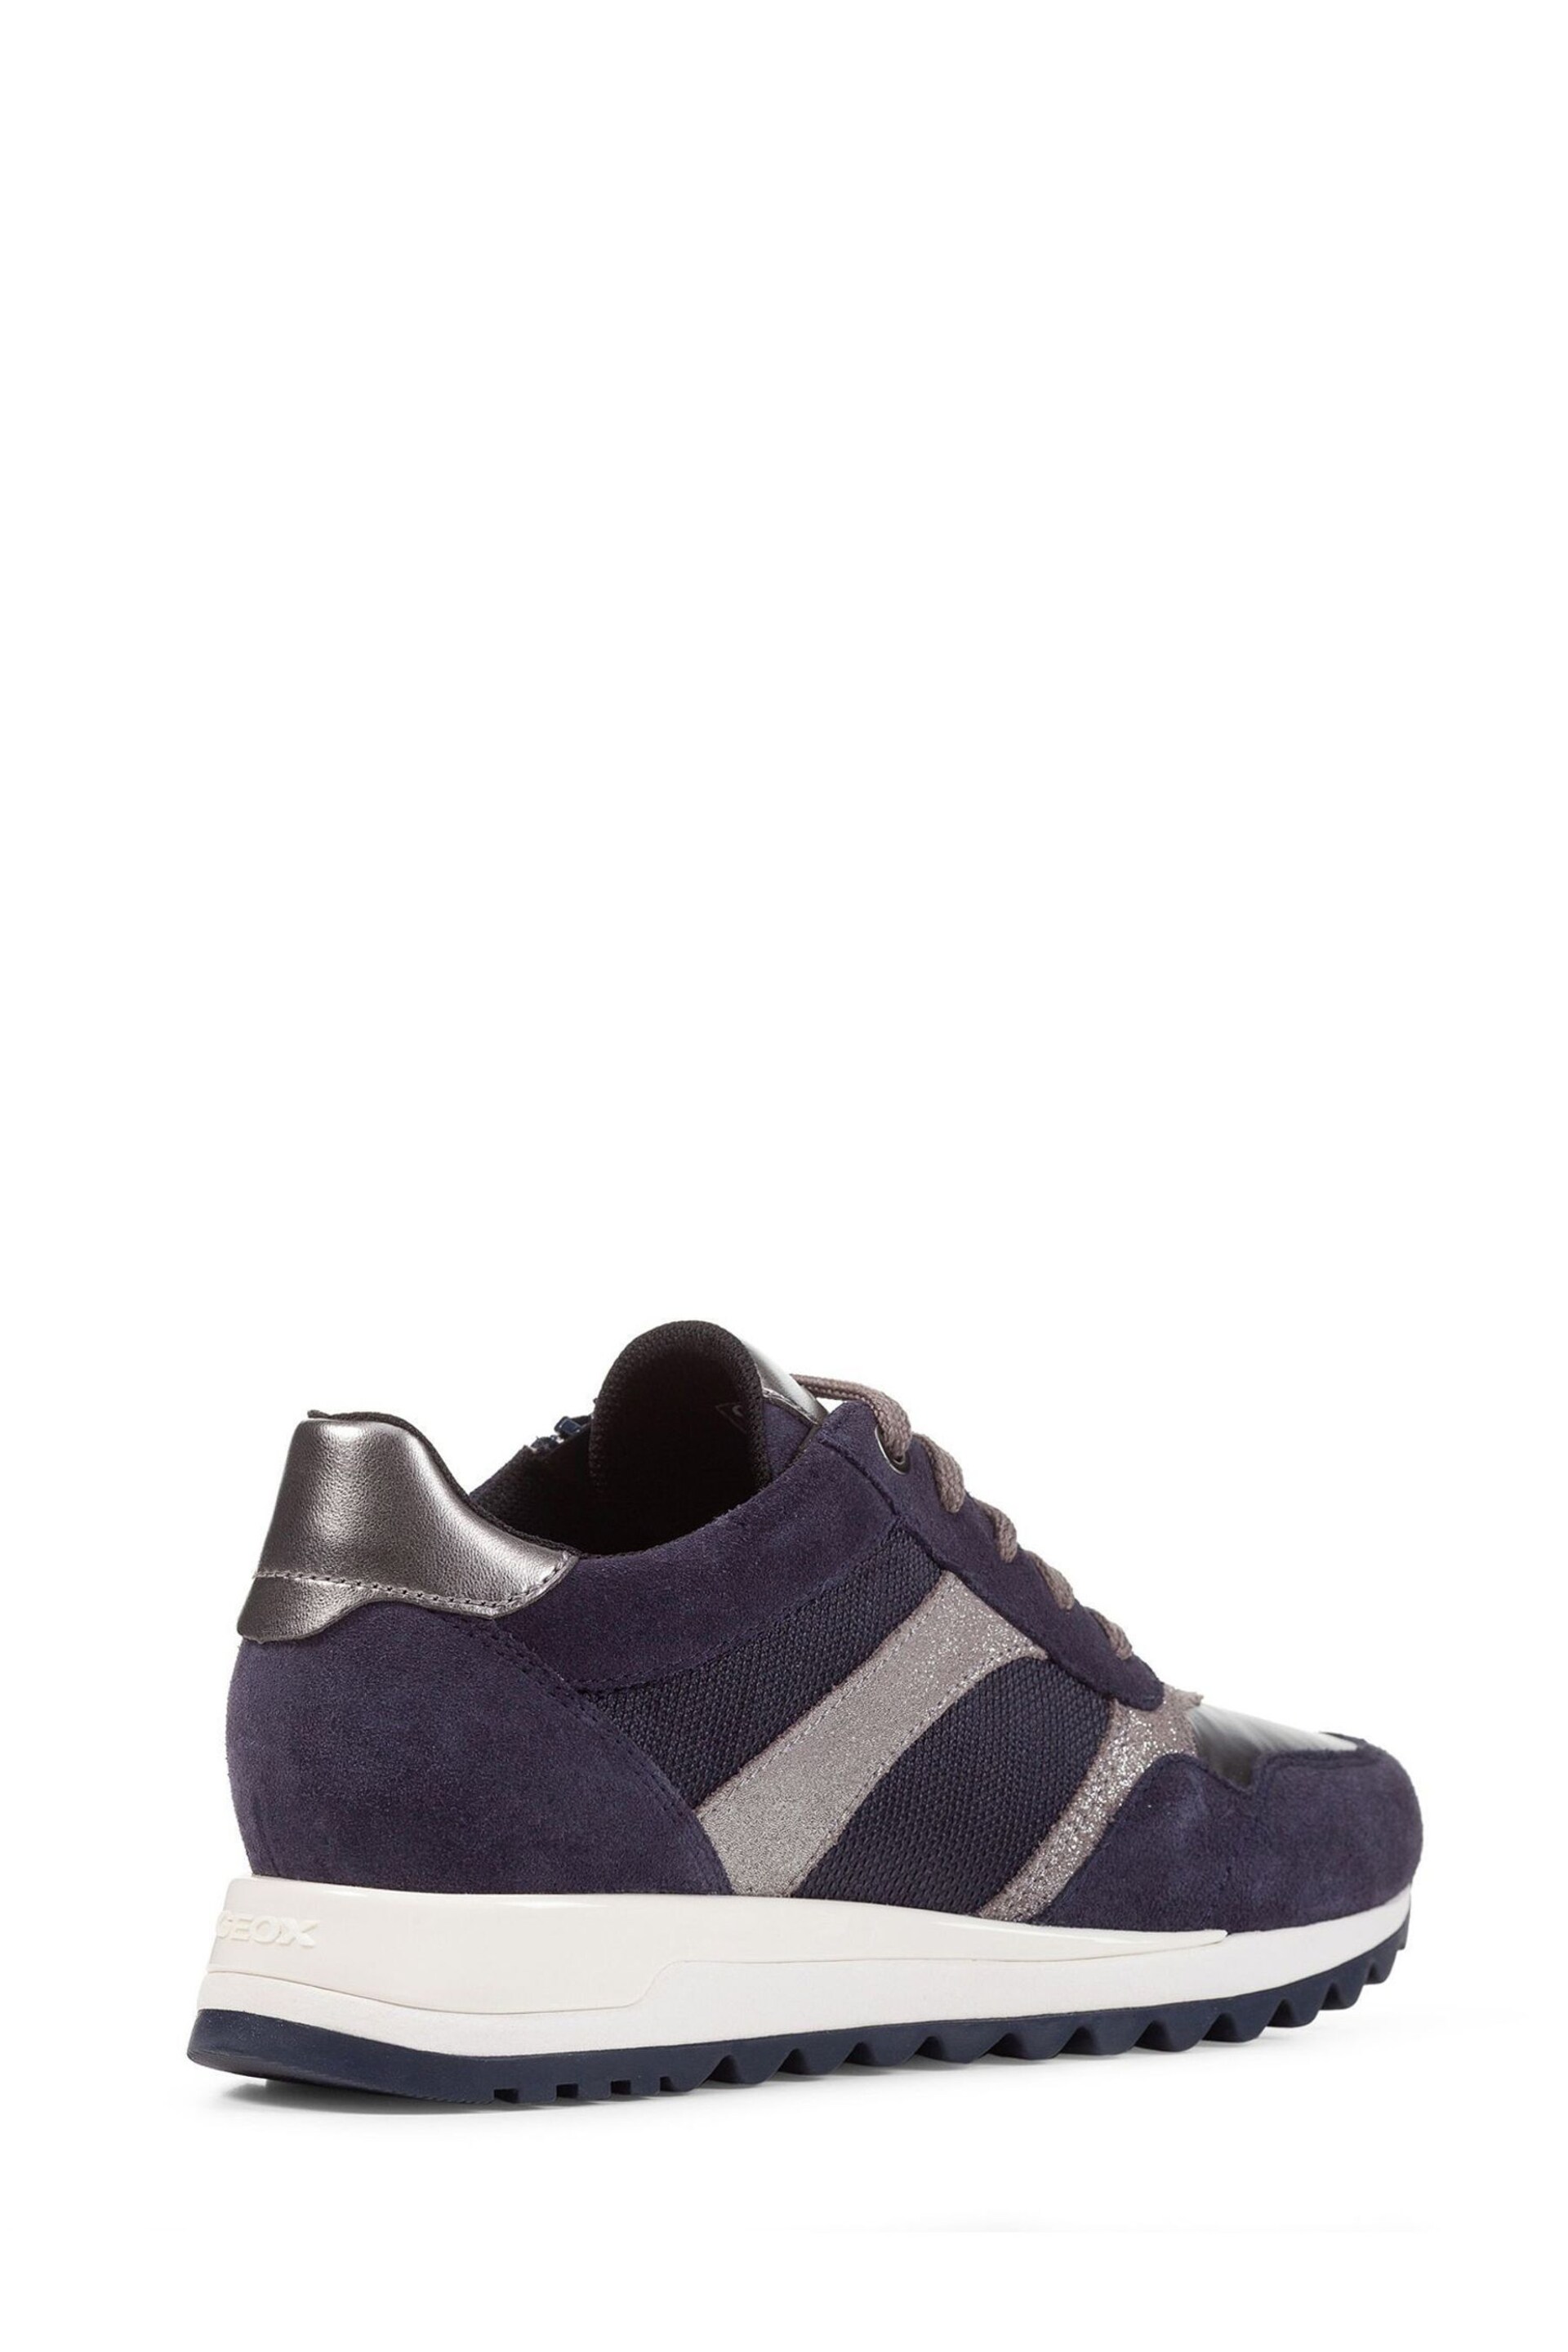 Geox Womens Tabelya Blue Trainers - Image 4 of 6